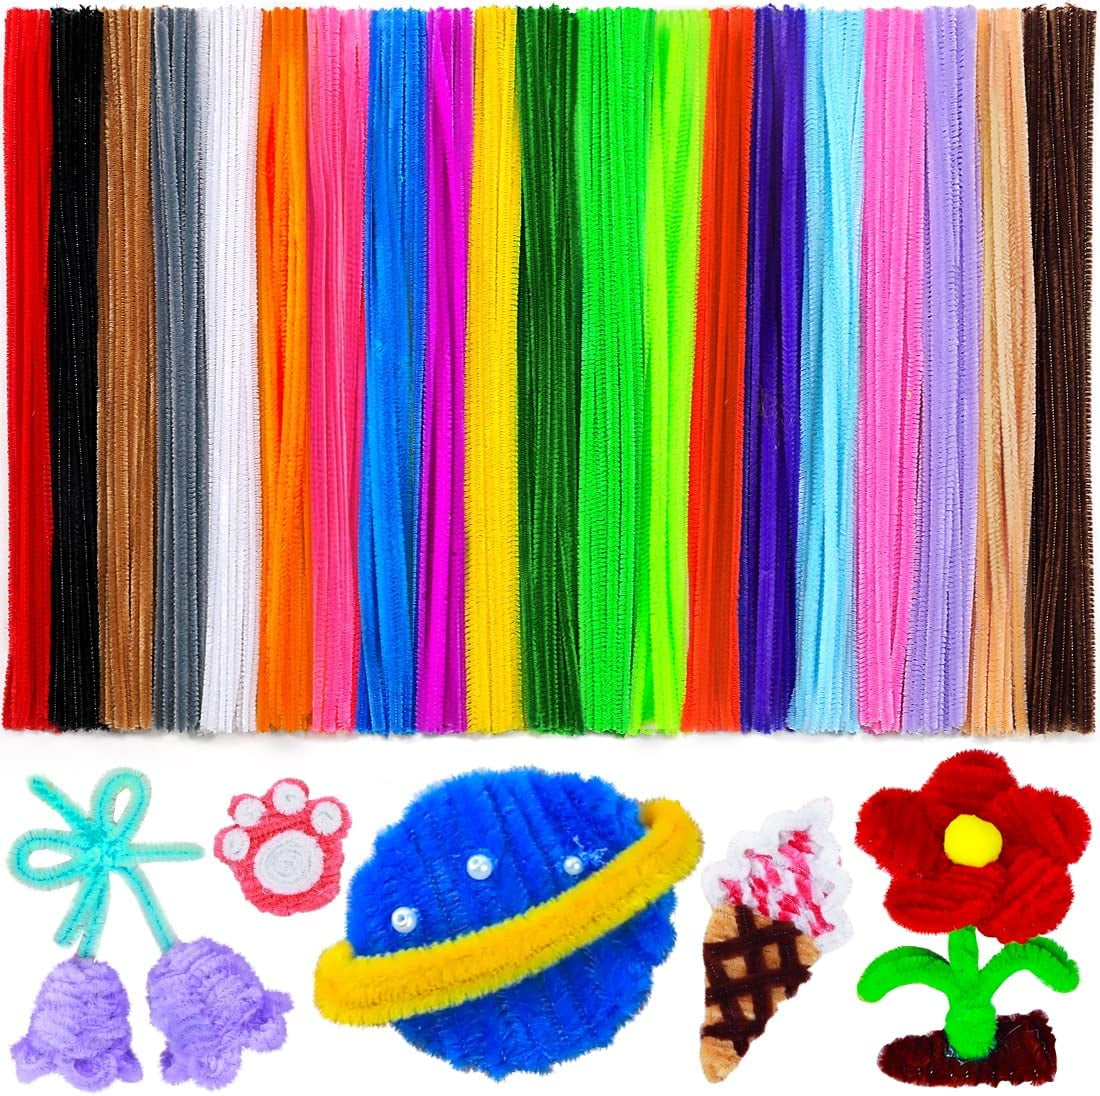 Baker Ross Bumpy Pipe Cleaners Value Pack (Per 3 Packs)